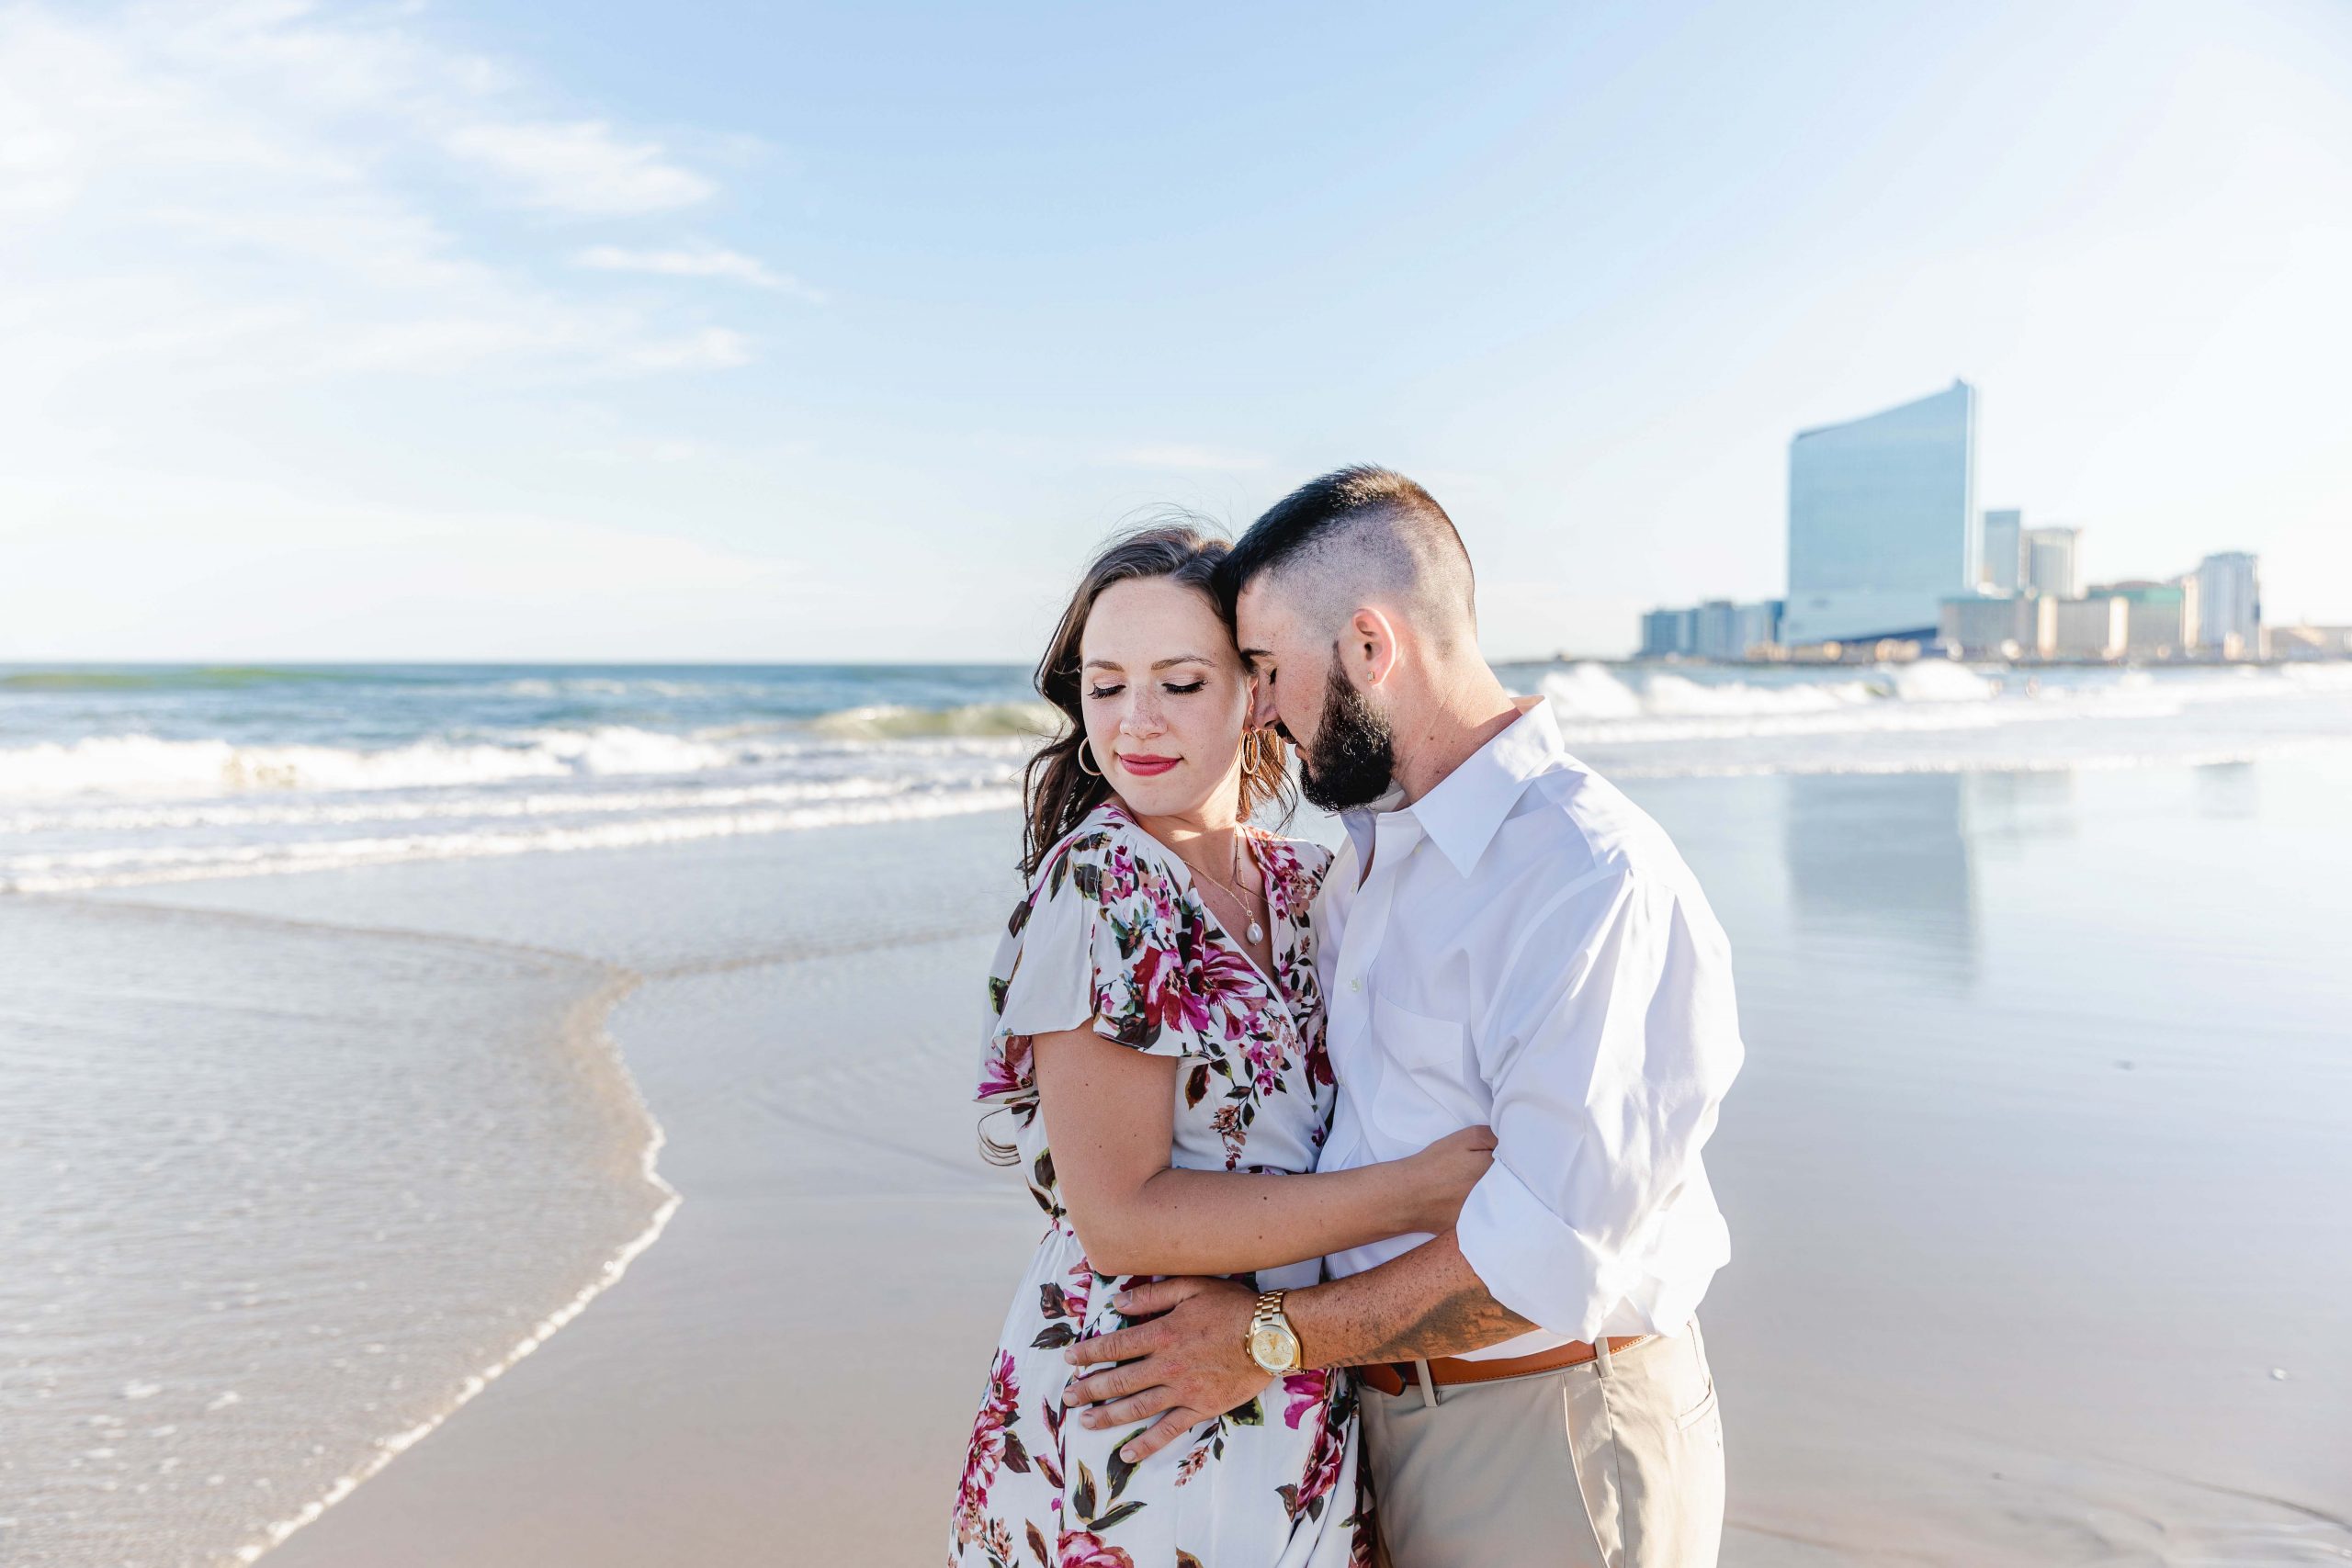 4 reasons to book an engagement session